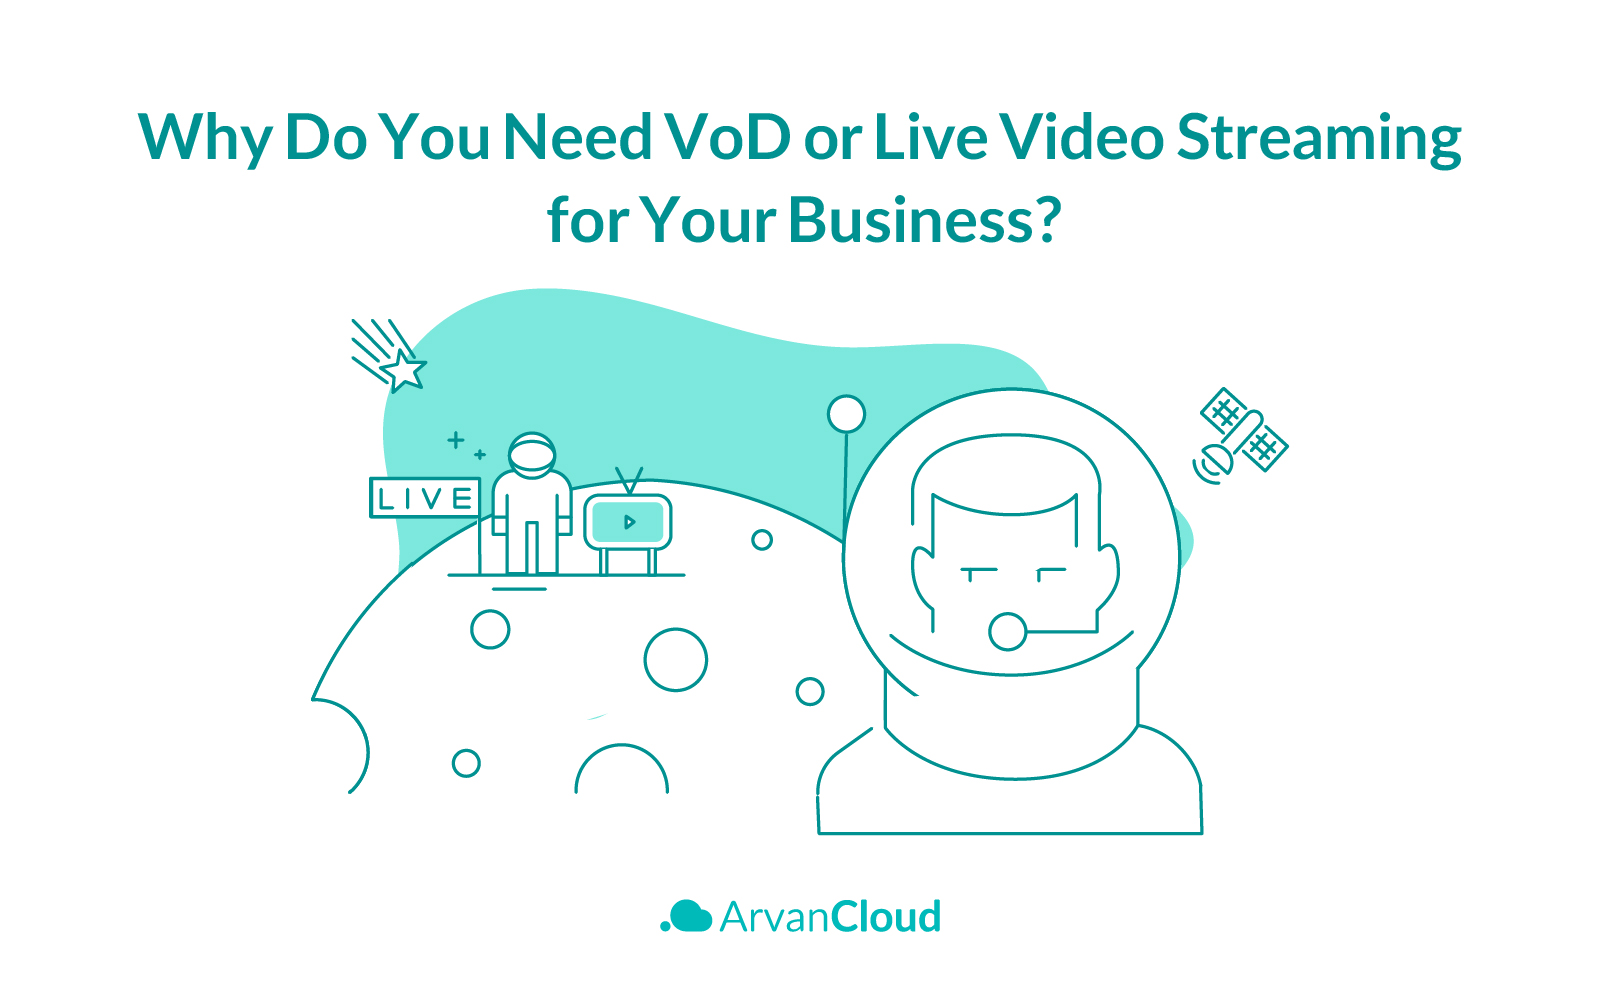 Why Do You Need VoD or Live Streaming for Your Business?